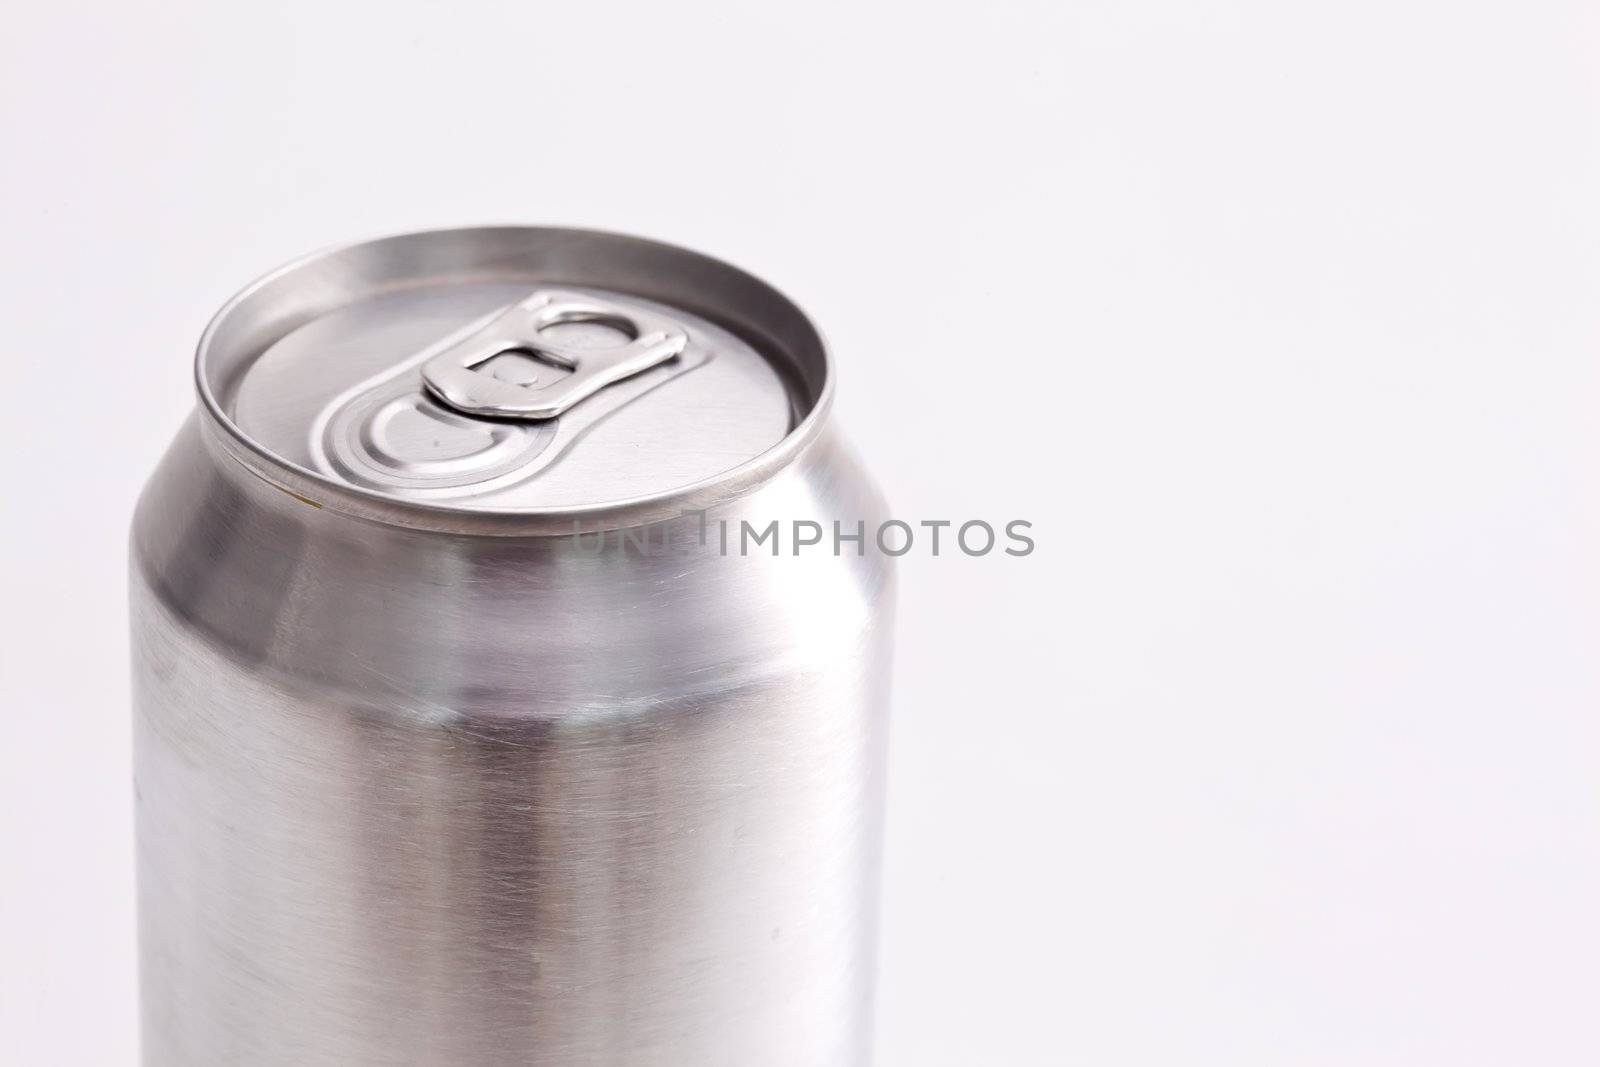 Closed aluminium can against a white background